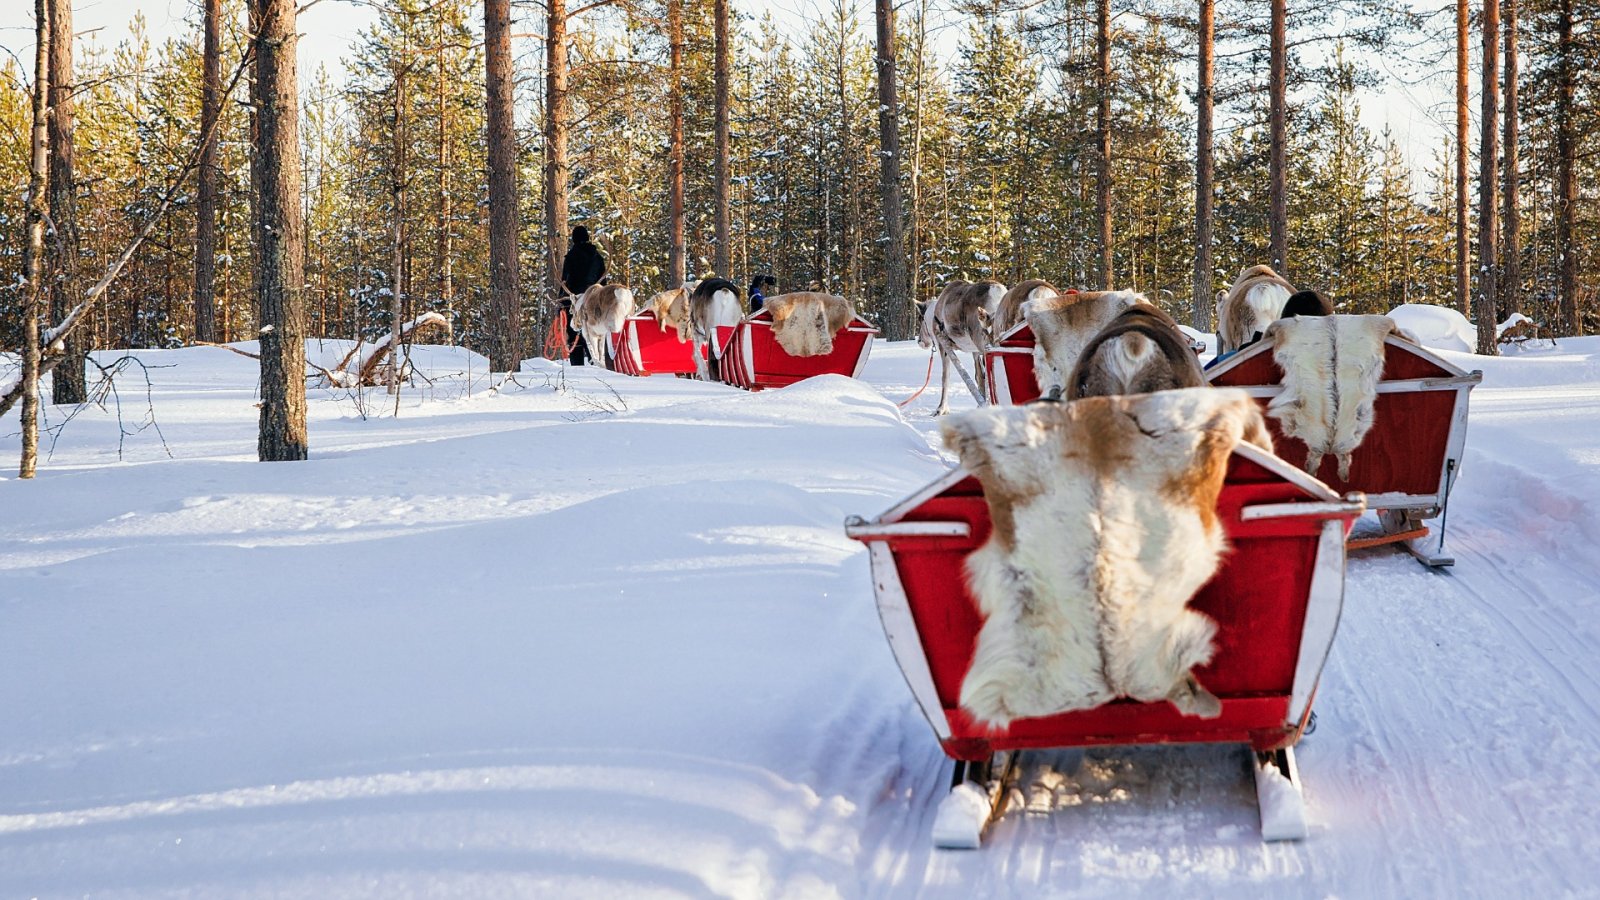 Sleigh Your Way to Christmas Cheer: A Family Guide to Planning a Magical Trip to Lapland